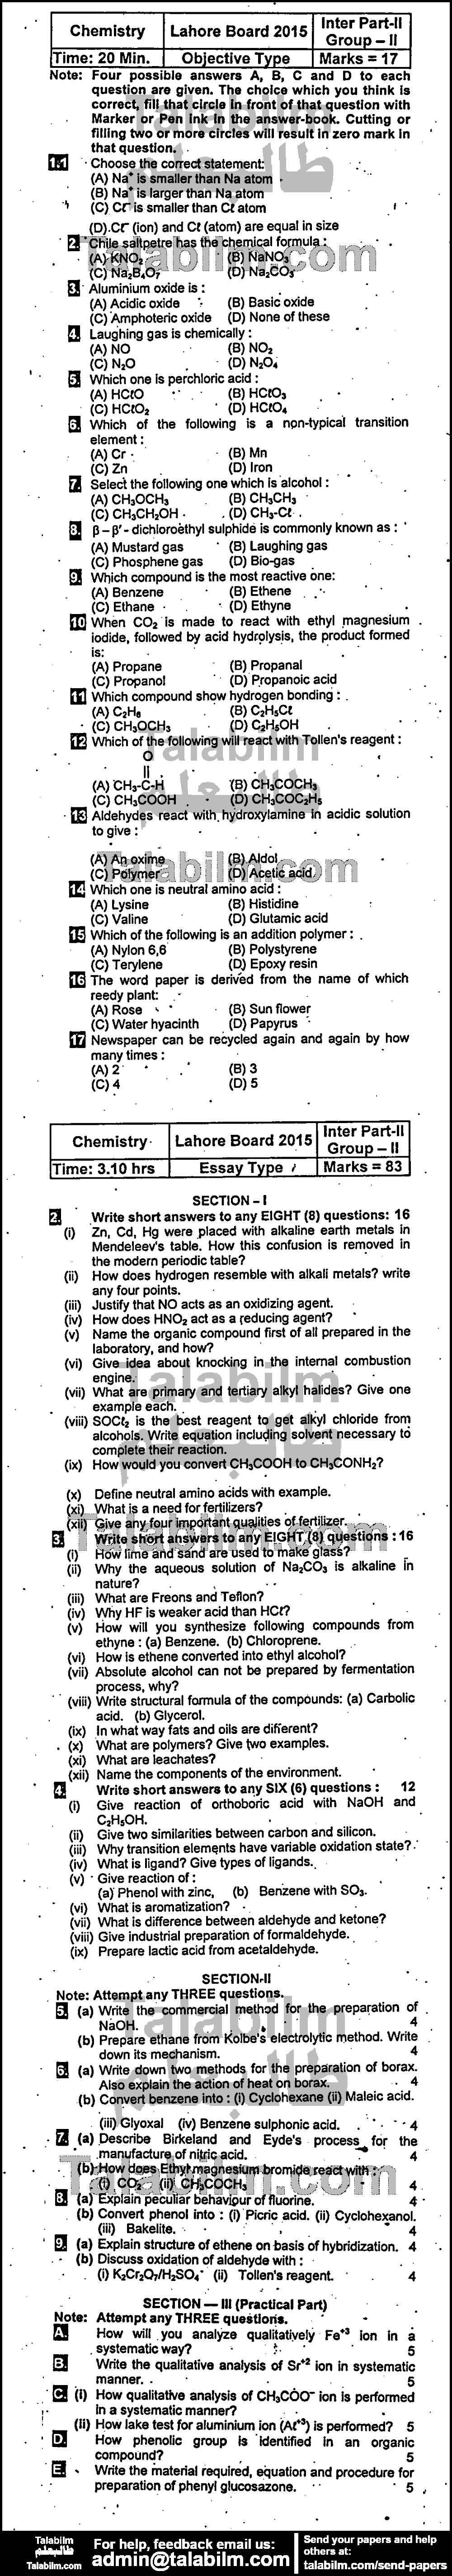 Chemistry 0 past paper for Group-II 2015